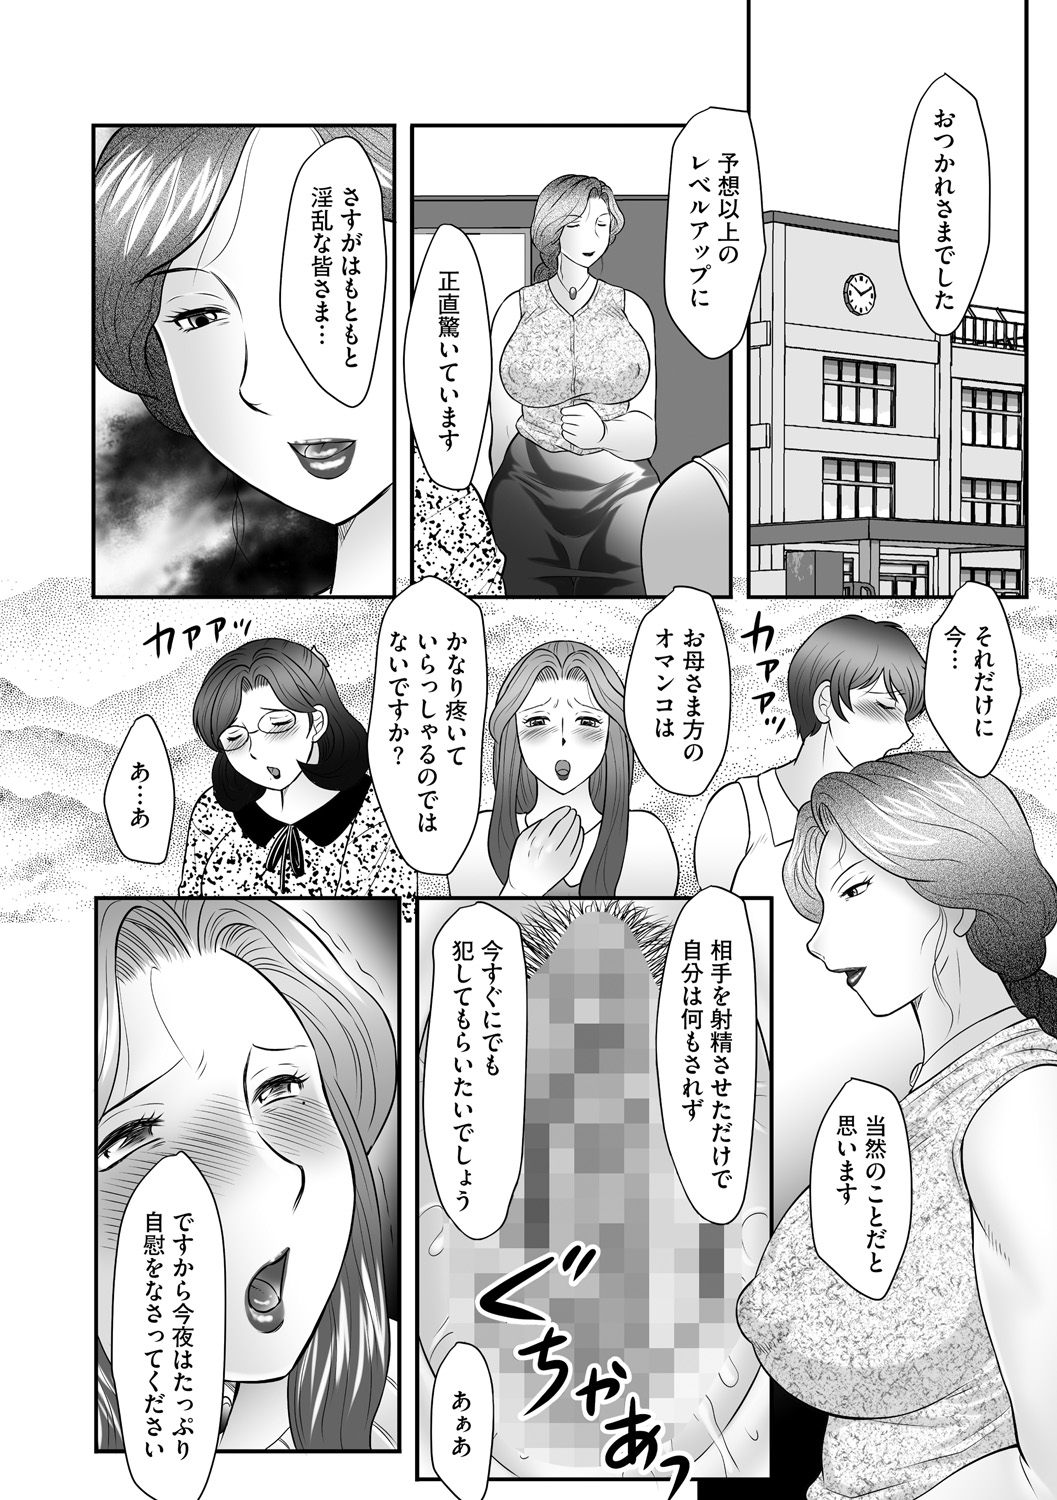 [Fuusen Club] Boshi no Susume - The advice of the mother and child Ch. 6 page 18 full